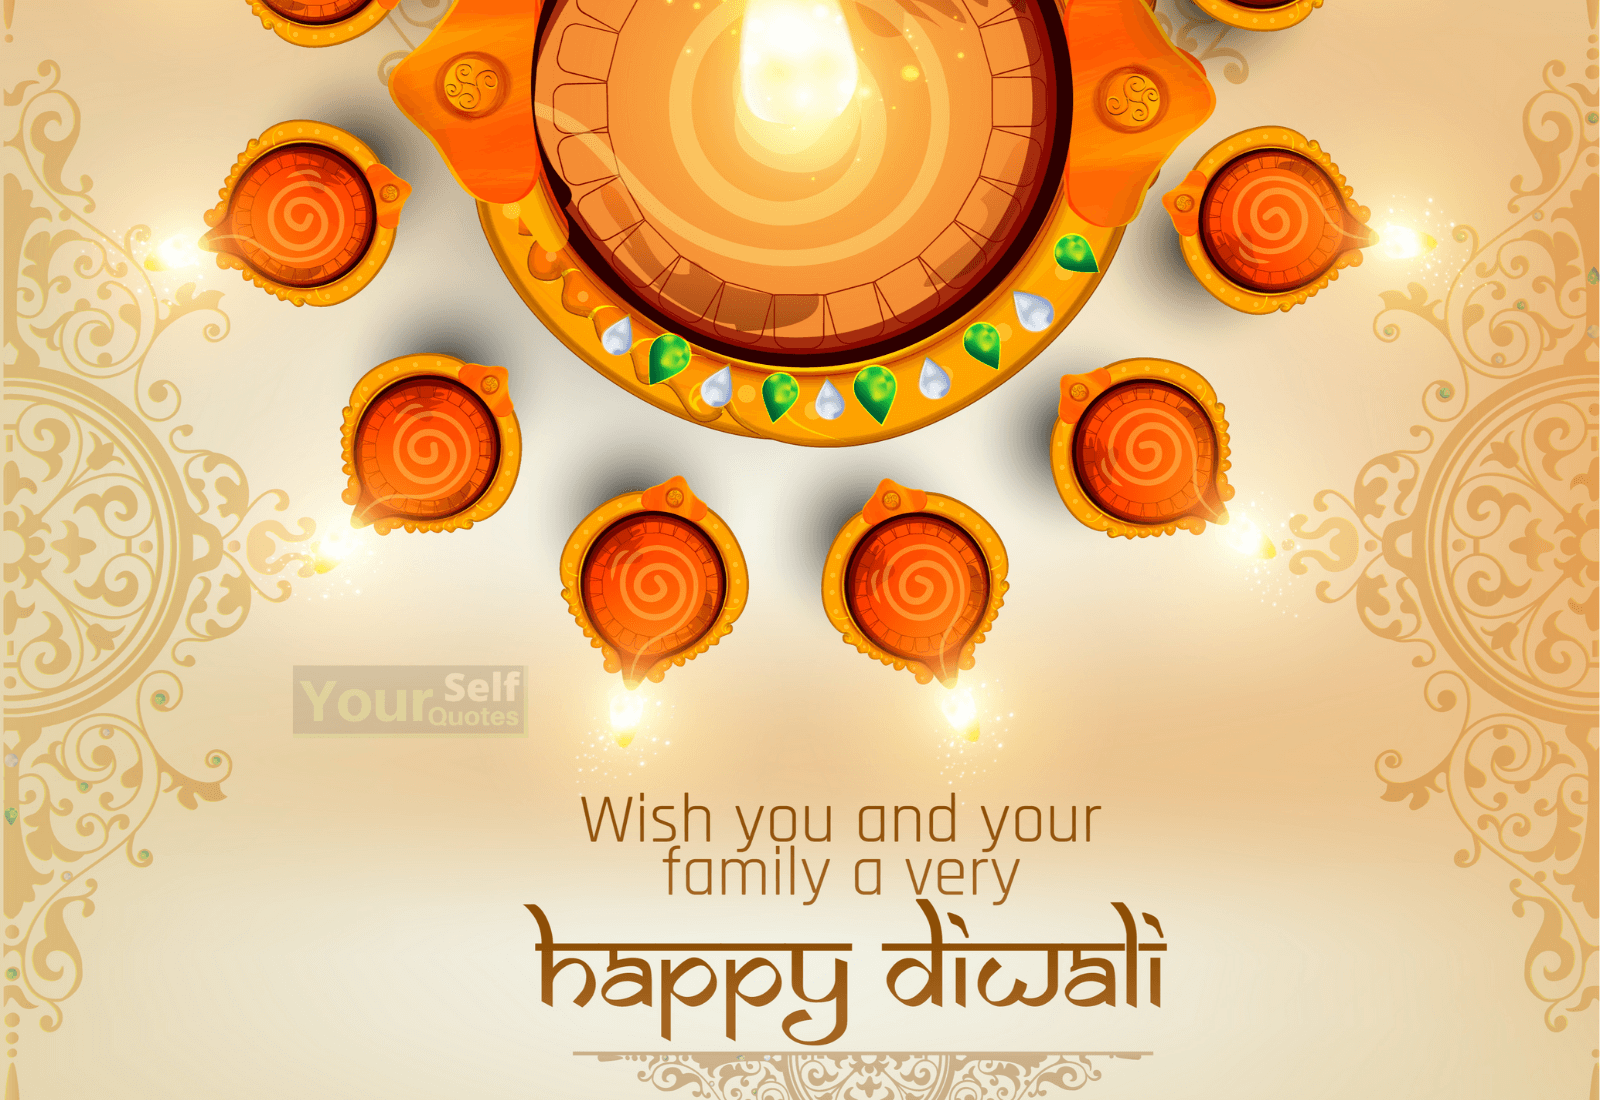 Happy Diwali Images, Photos, Pictures, Wallpapers For WhatsApp & Facebook